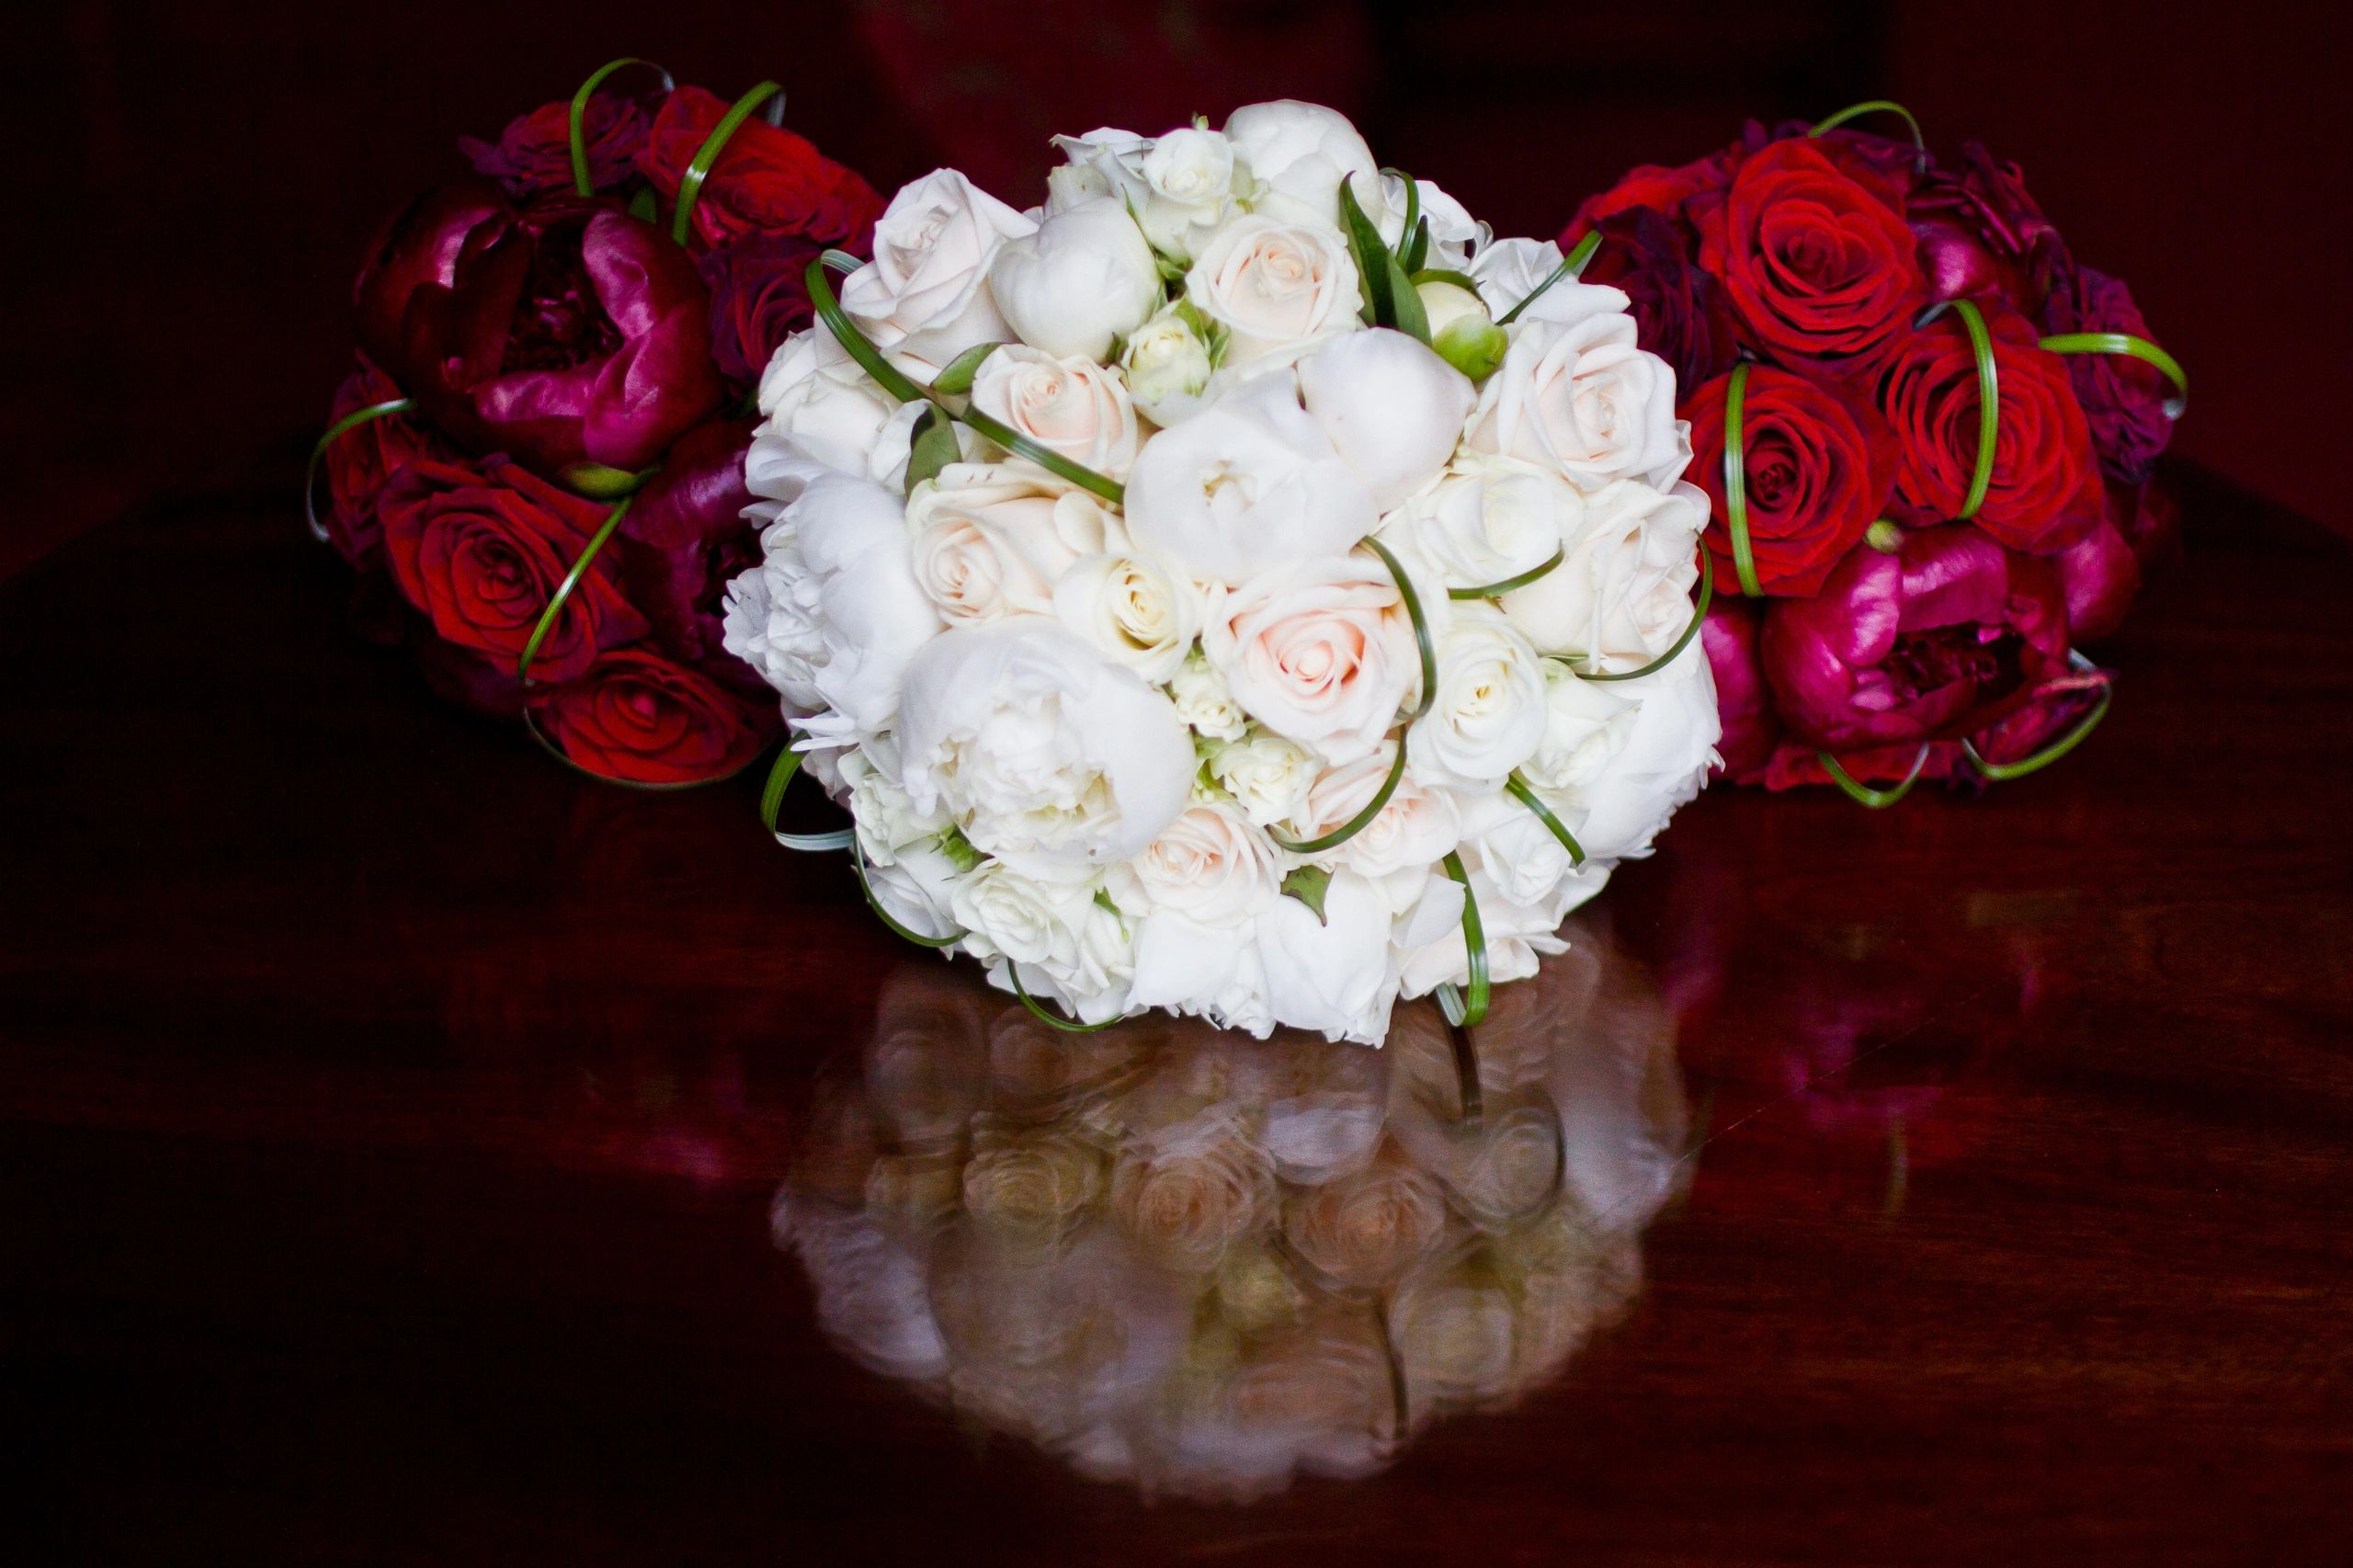 Wedding bouquets at Hopetoun House Edinburgh of Peonies and roses in a hand tied style